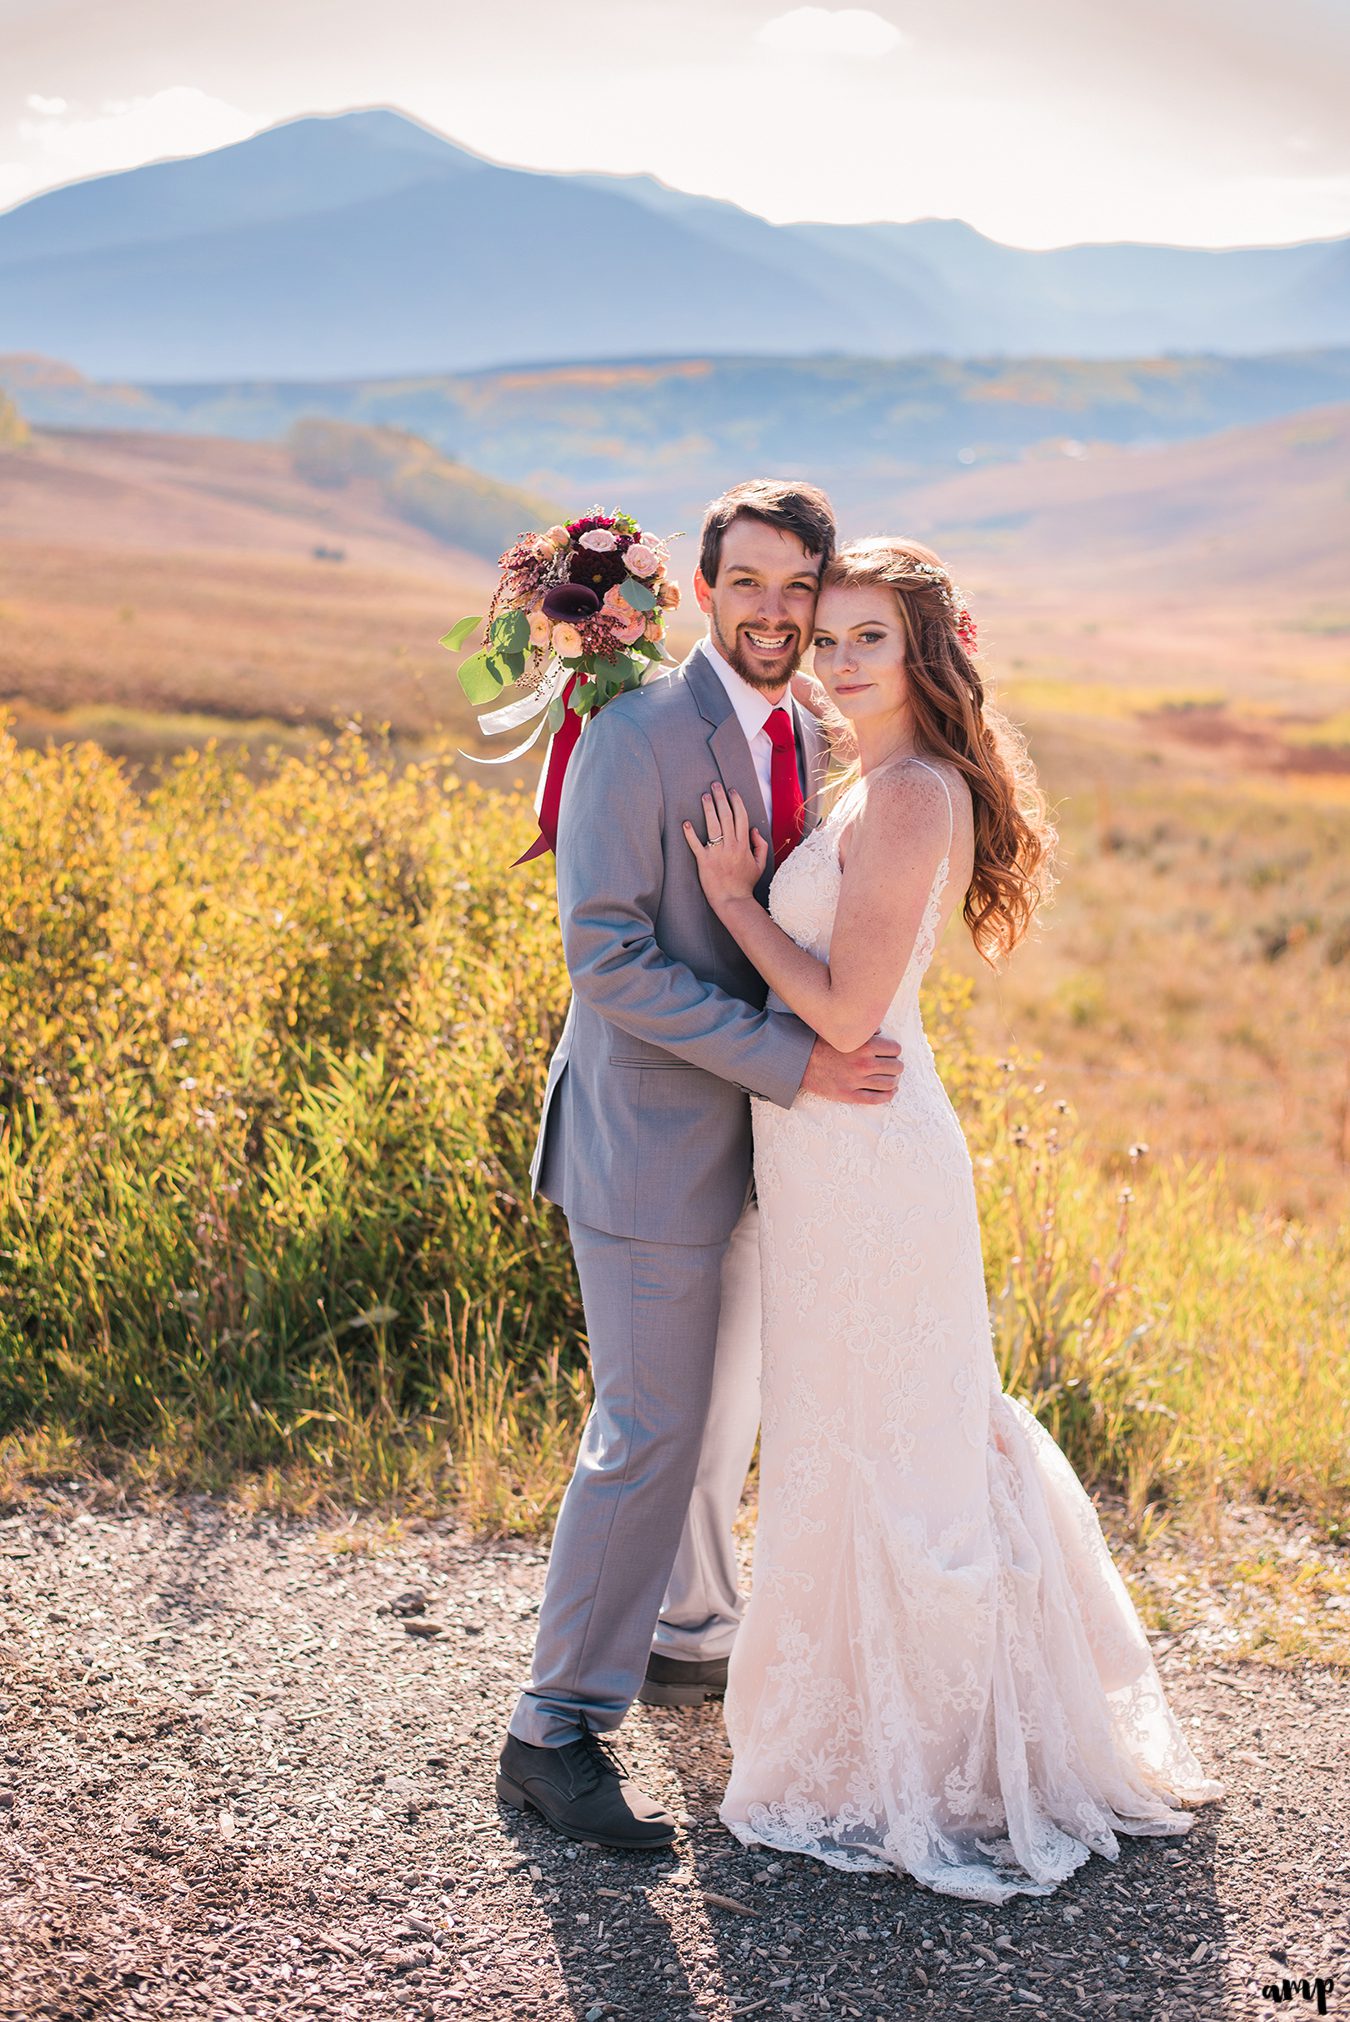 Bride and groom snuggling among the fall colors with mountains in the background